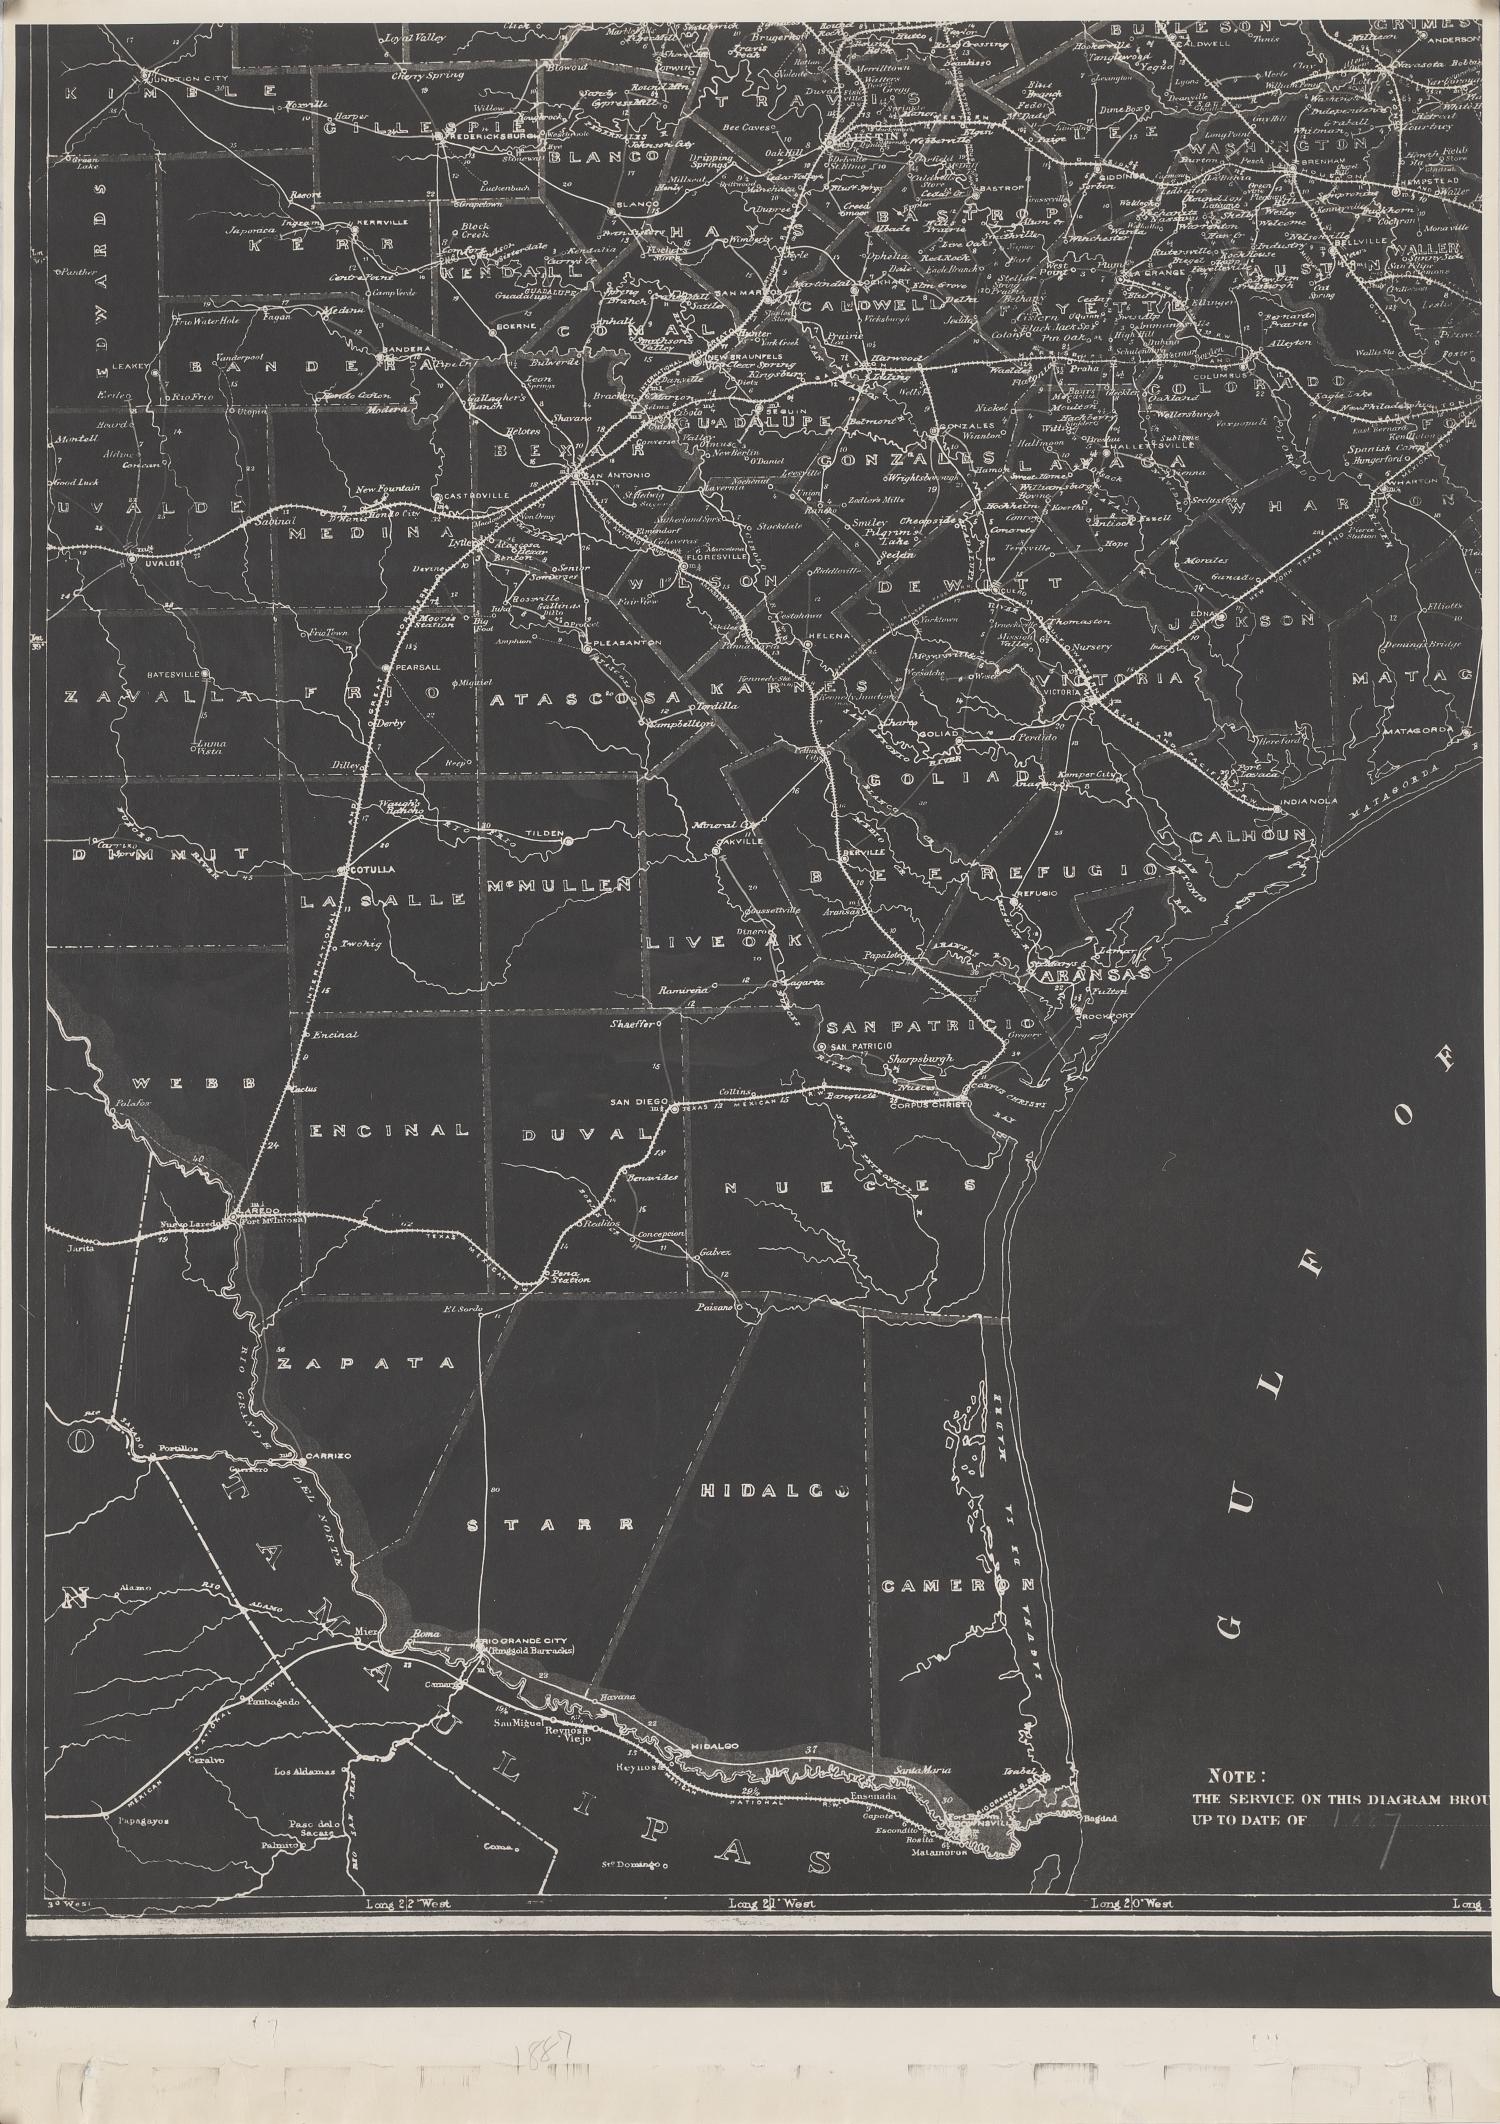 Post Route Map of the State of Texas with Adjacent Parts of Louisiana, Arkansas, Indian Territory and the Republic of Mexico 1887 (6).
                                                
                                                    [Sequence #]: 1 of 1
                                                